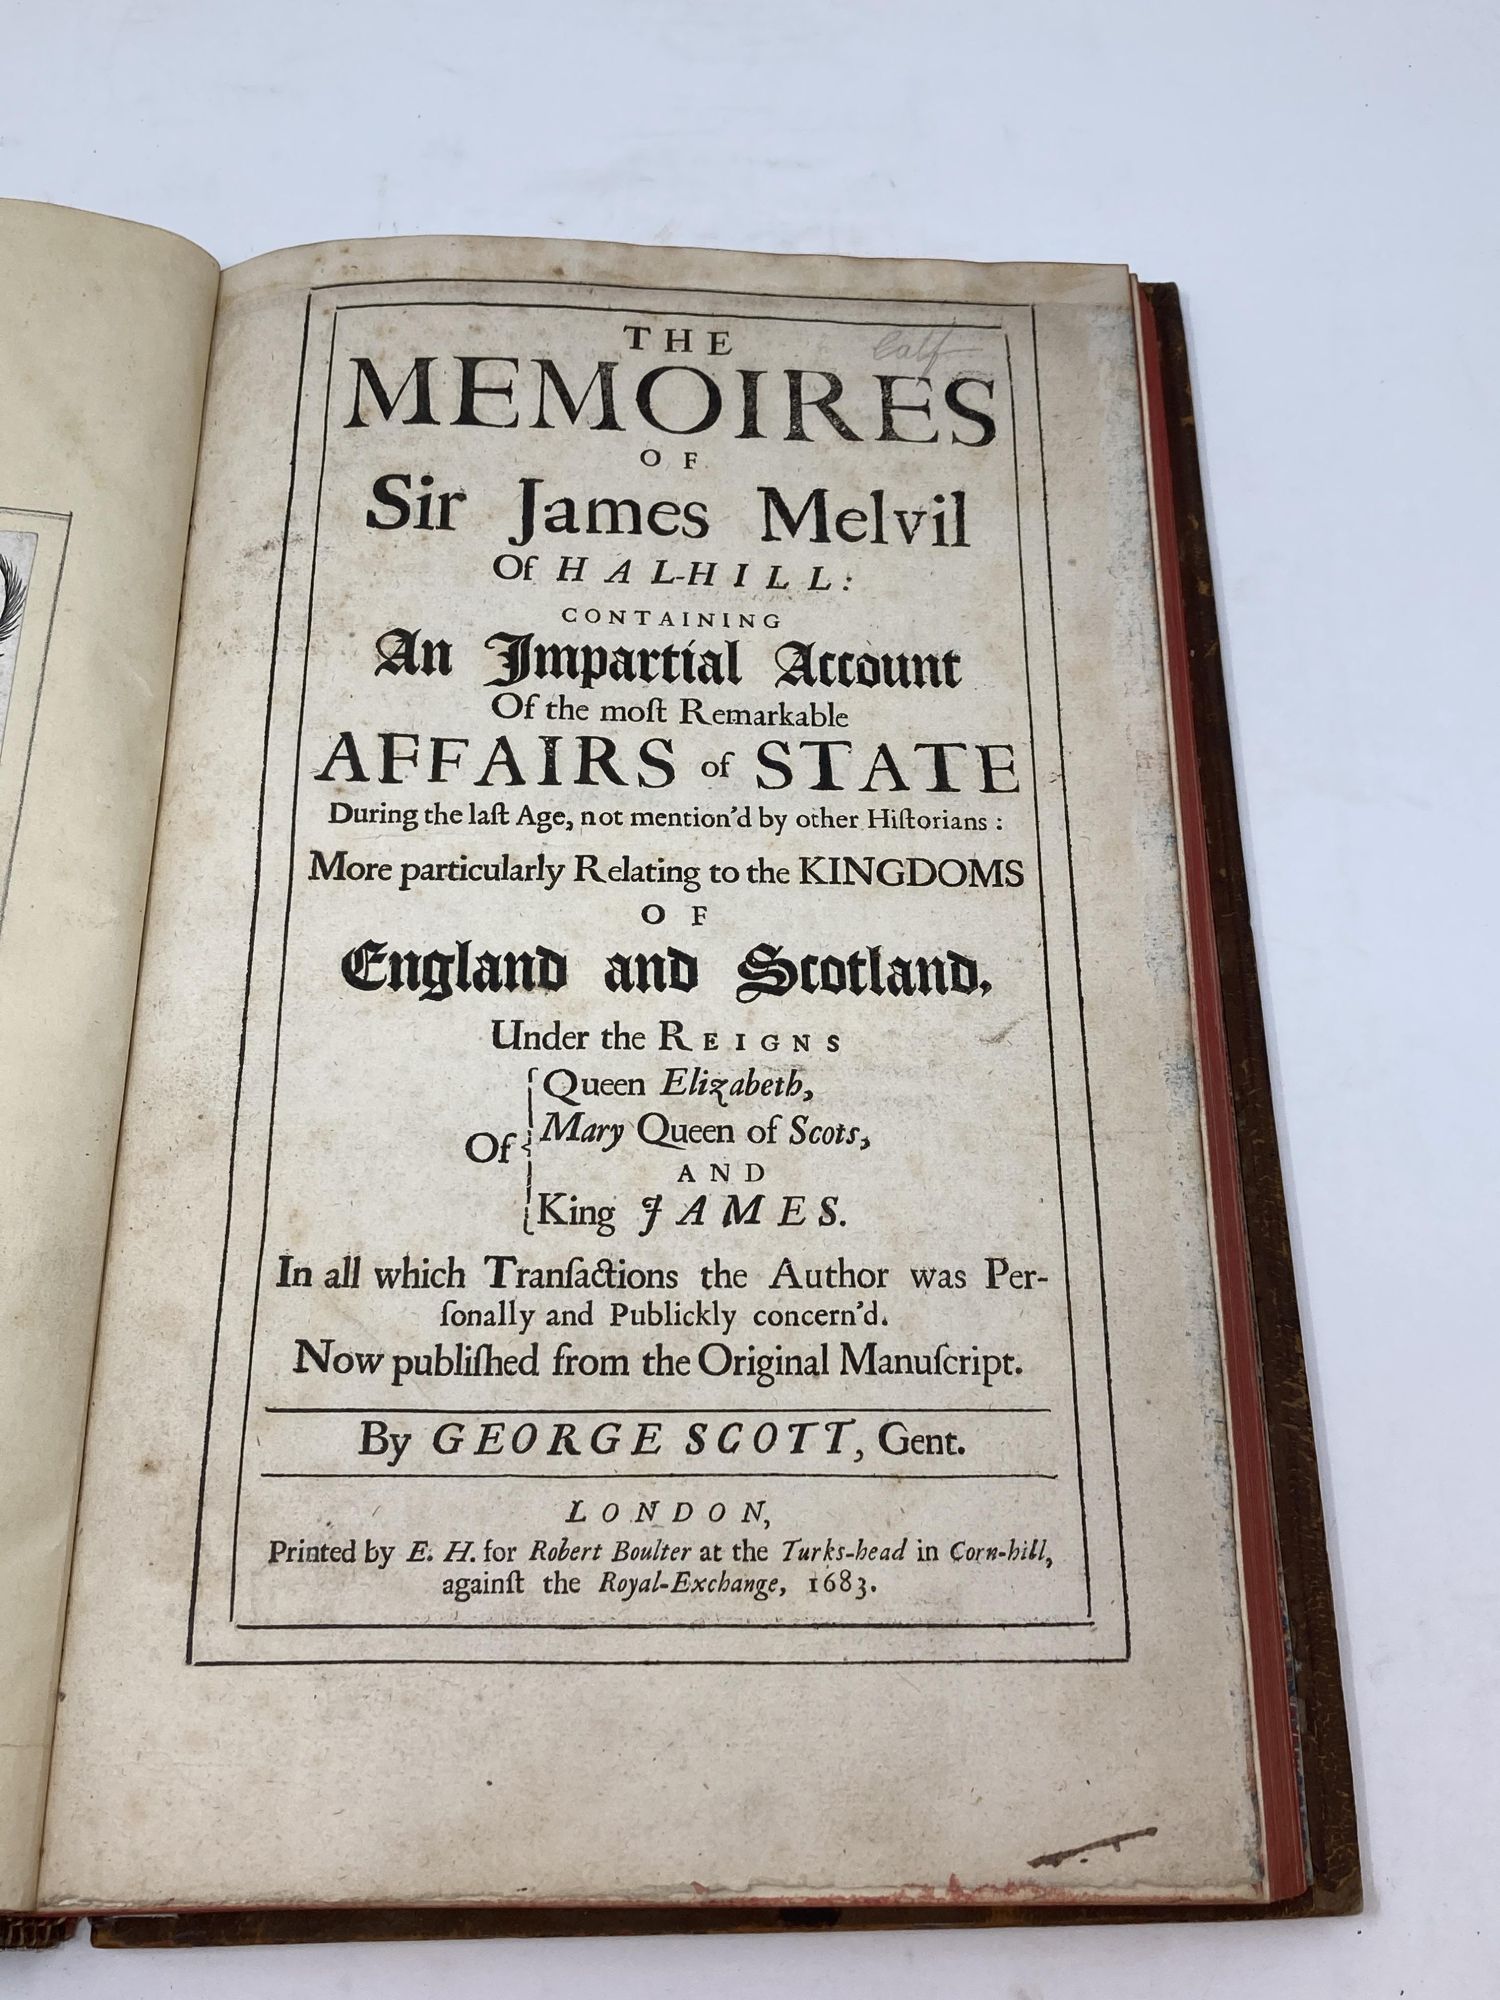 Scott, George - The Memoires of Sir James Melvil of Hal- Hill Containing an Impartial Account of the Most Remarkable Affairs of State During the Last Age, Not Mention'd by Other Historians: More Particularly Relating to the Kingdoms of England and Scotland, Under the Reigns of Queen Elizabeth, Mary Queen of Scots, and King James in Which All Transactions the Author Was Personally and Publickly Concern'd. Now Published from the Original Manuscript; Containing an Impartial Account of the Most Remarkable Affairs of State During the Last Age, Not Mention'd by Other Historians: More Particularly Relating to the Kingdoms of England and Scotland, Under the Reigns of Queen Elizabeth, Mary Queen of Scots, and King James. In All Which Transactions the Author Was Personally and Publickly Concern'd. Now Published from the Original Manuscript